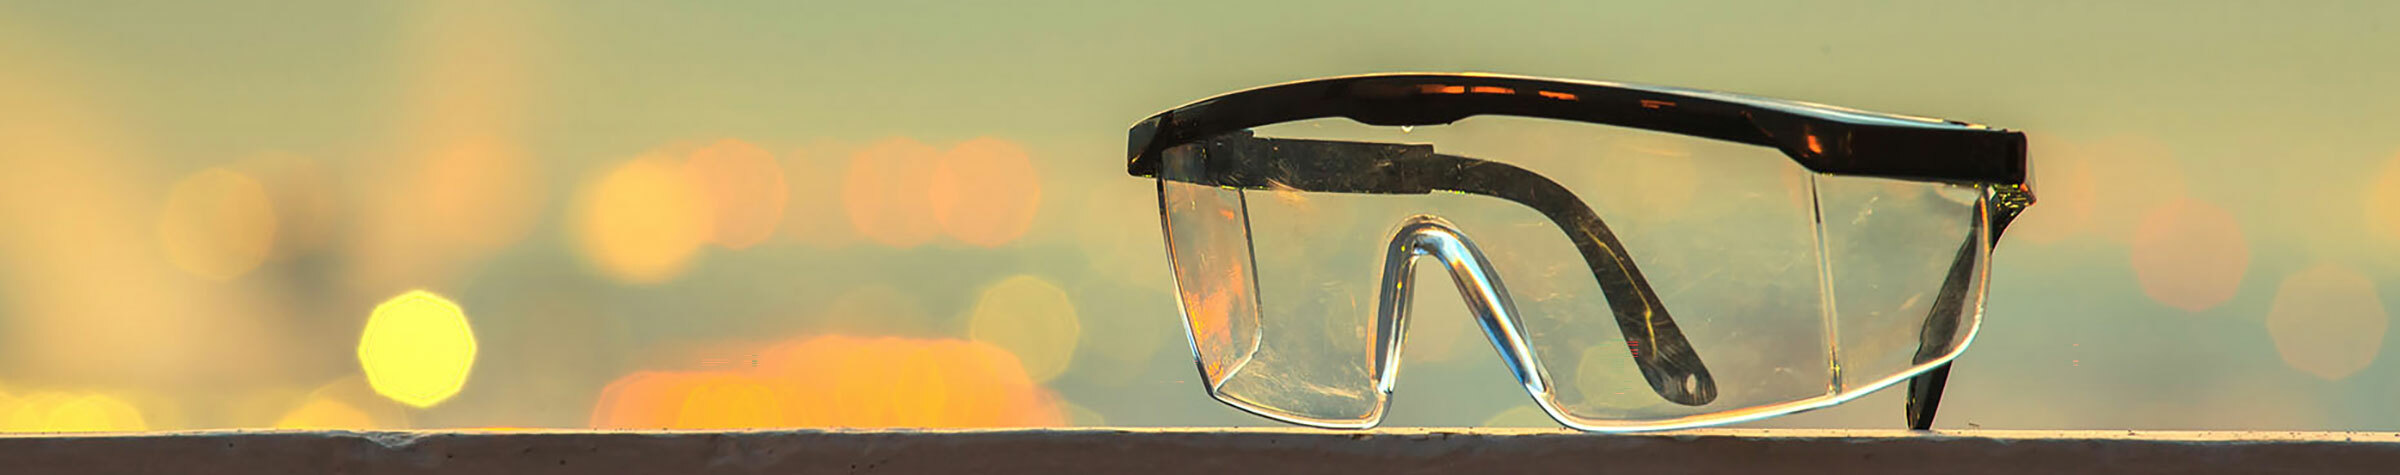 Safety glasses in front of a blurred background